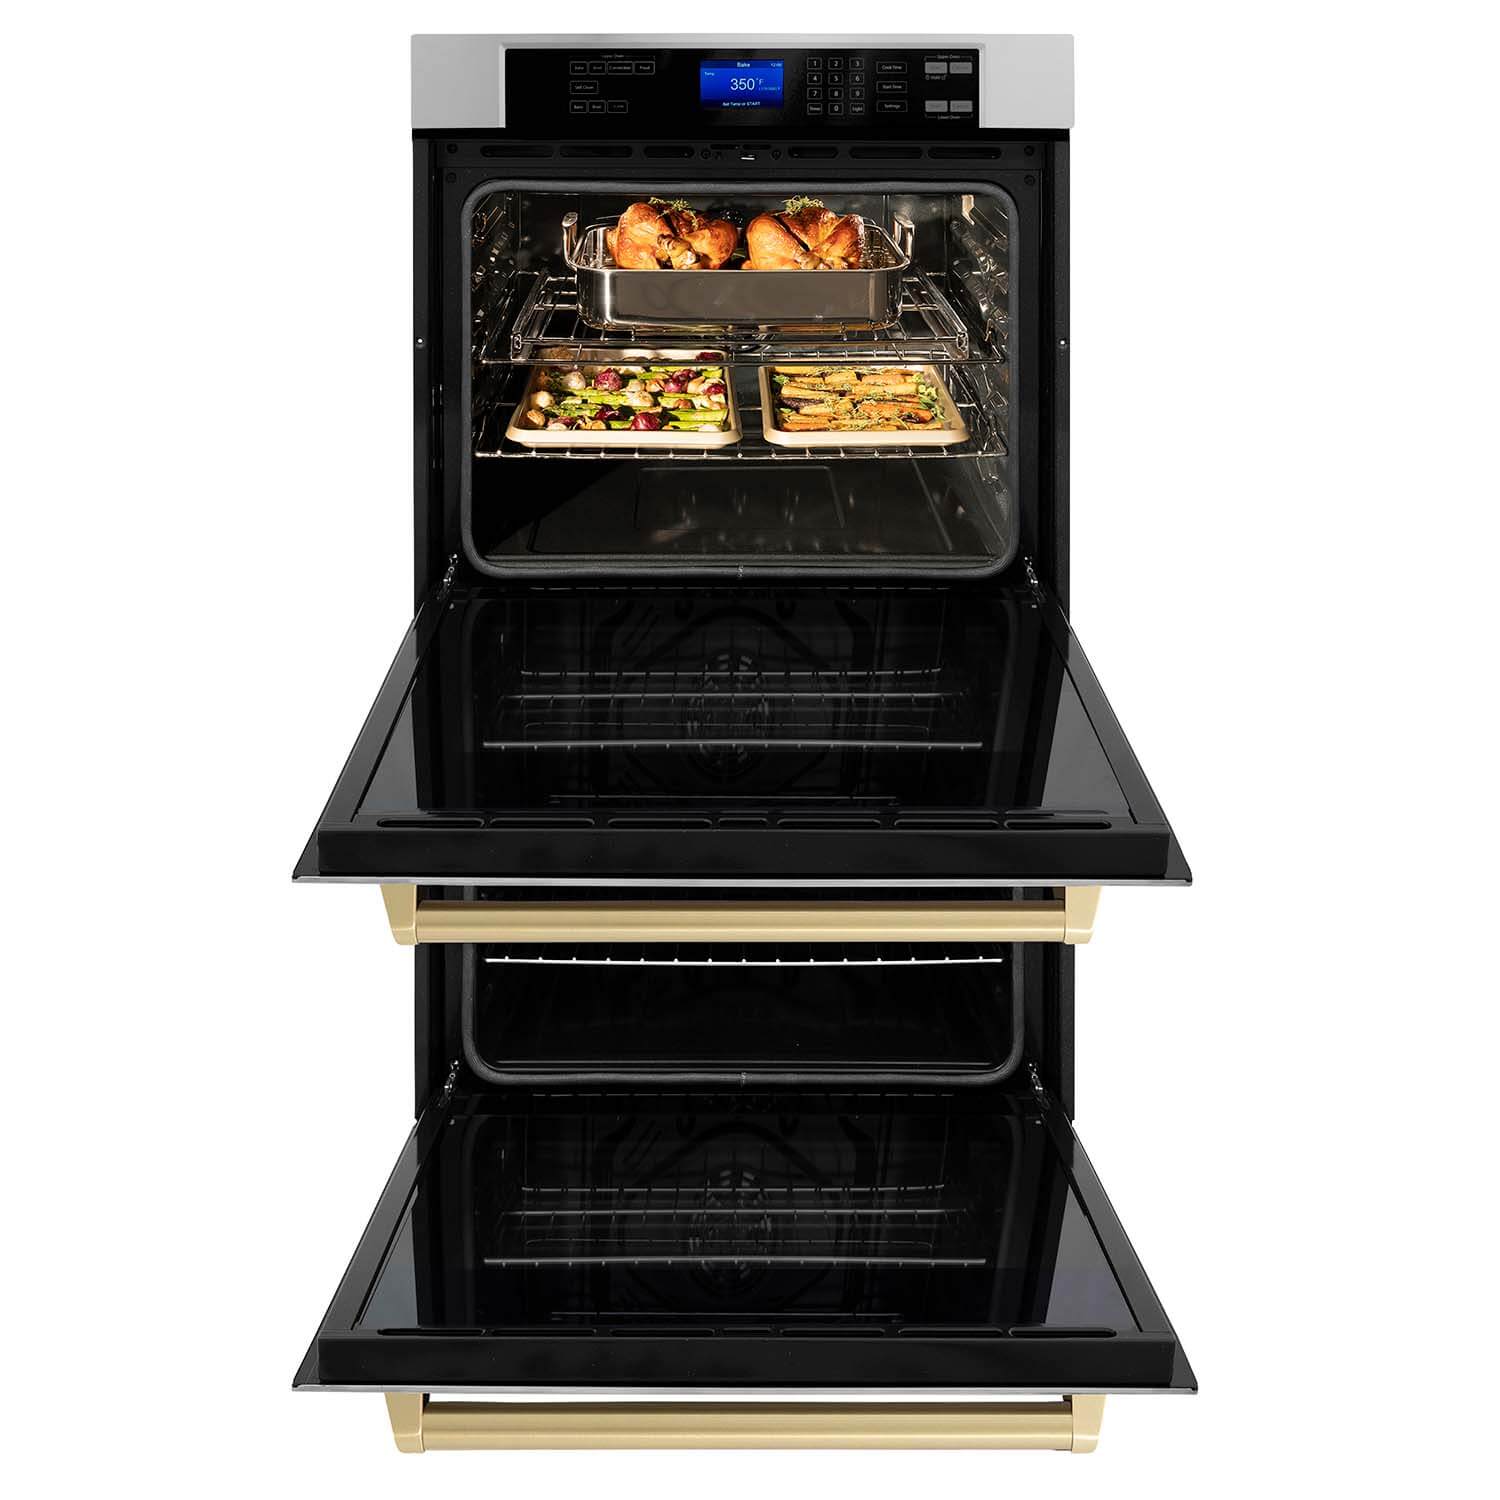 ZLINE Autograph Edition 30 in. Electric Double Wall Oven with Self Clean and True Convection in DuraSnow® Stainless Steel and Polished Gold Accents (AWDSZ-30-G) front, oven open.